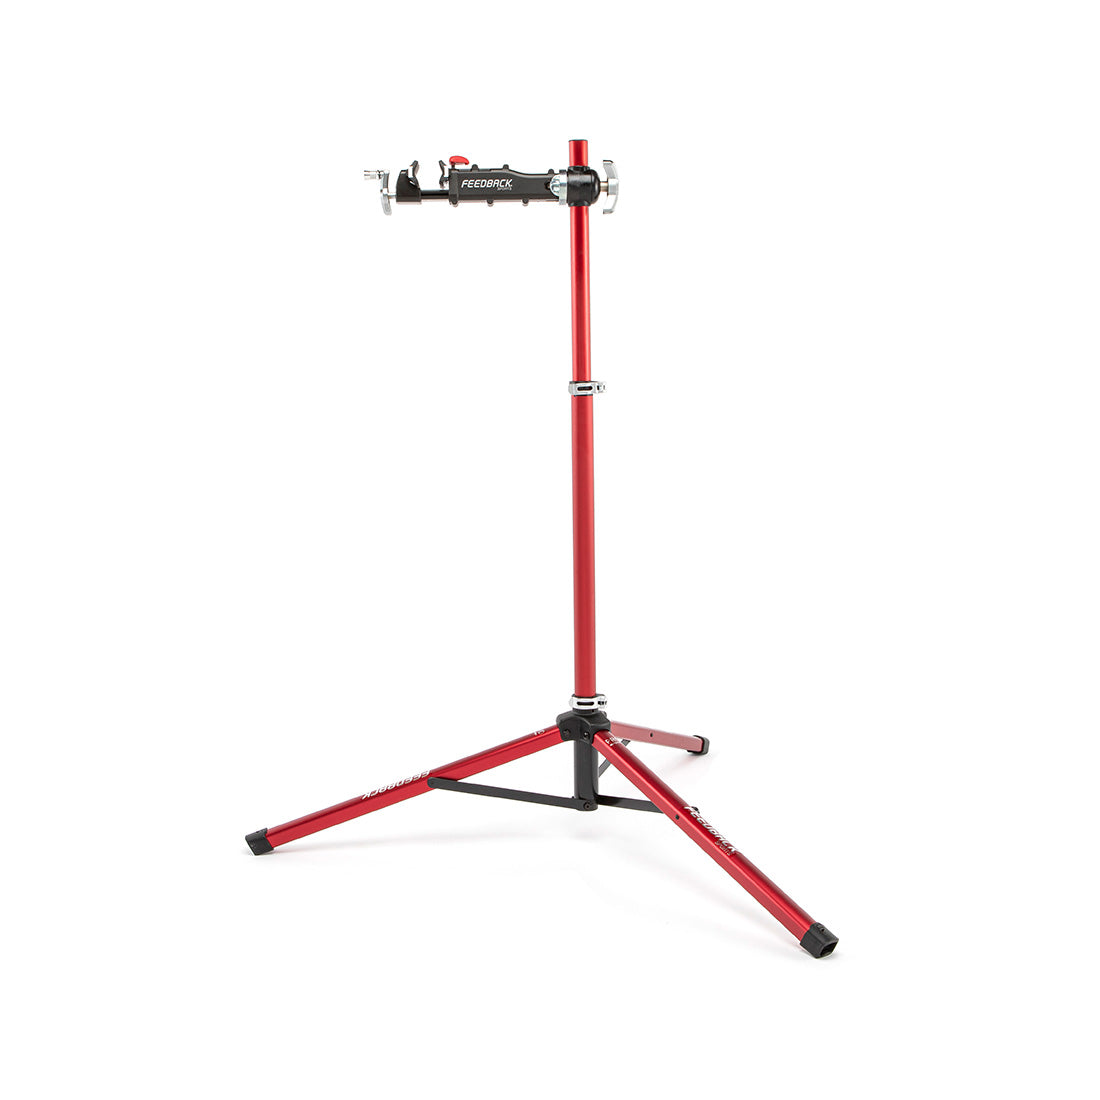 Bike-First Elite Heavy-Duty Bike Stand and Repair Stand with